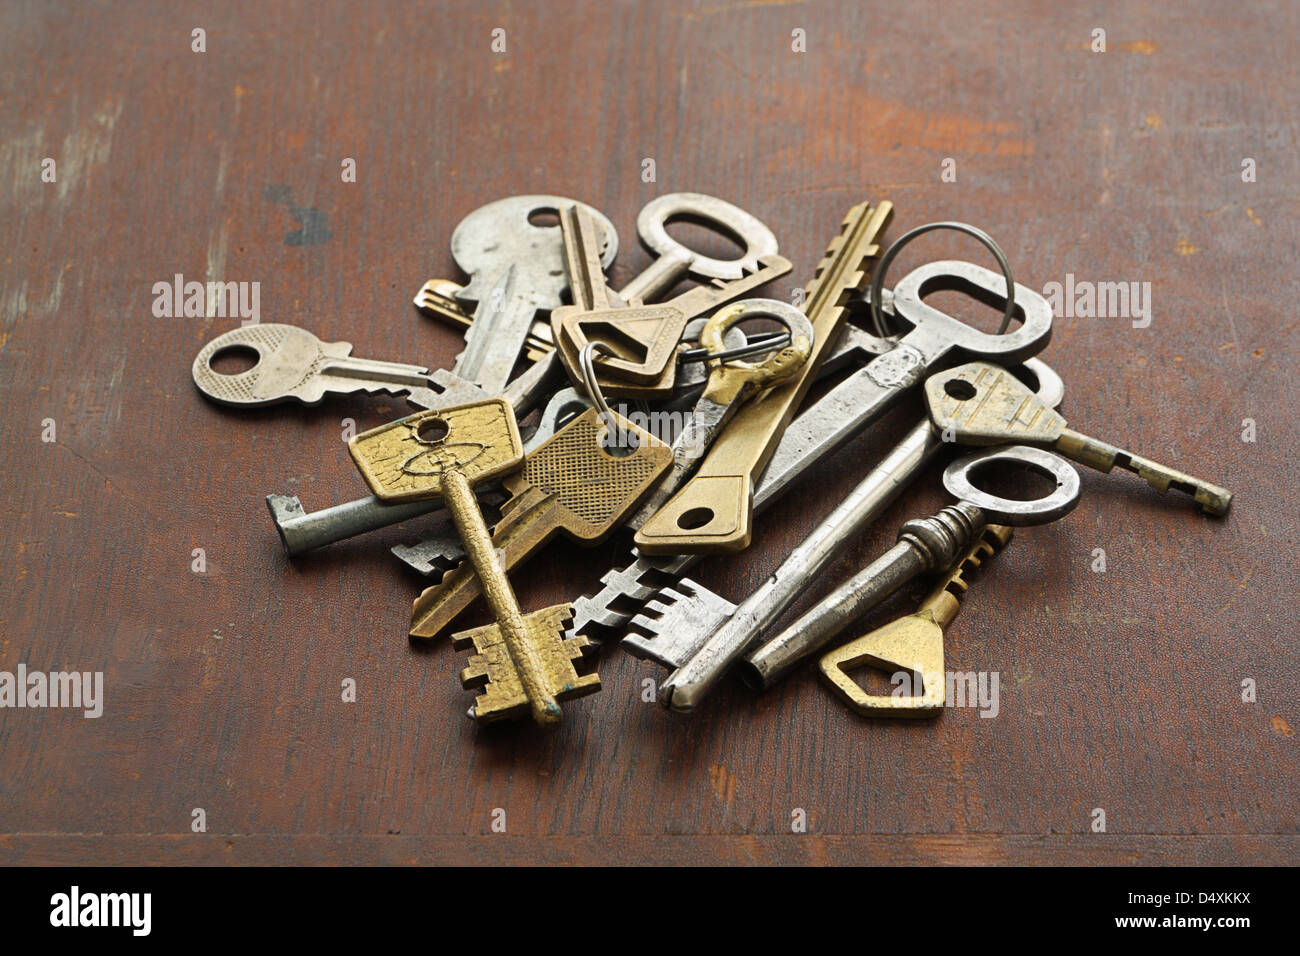 Group Of Vintage Keys On Old Wooden Table Stock Photo Alamy